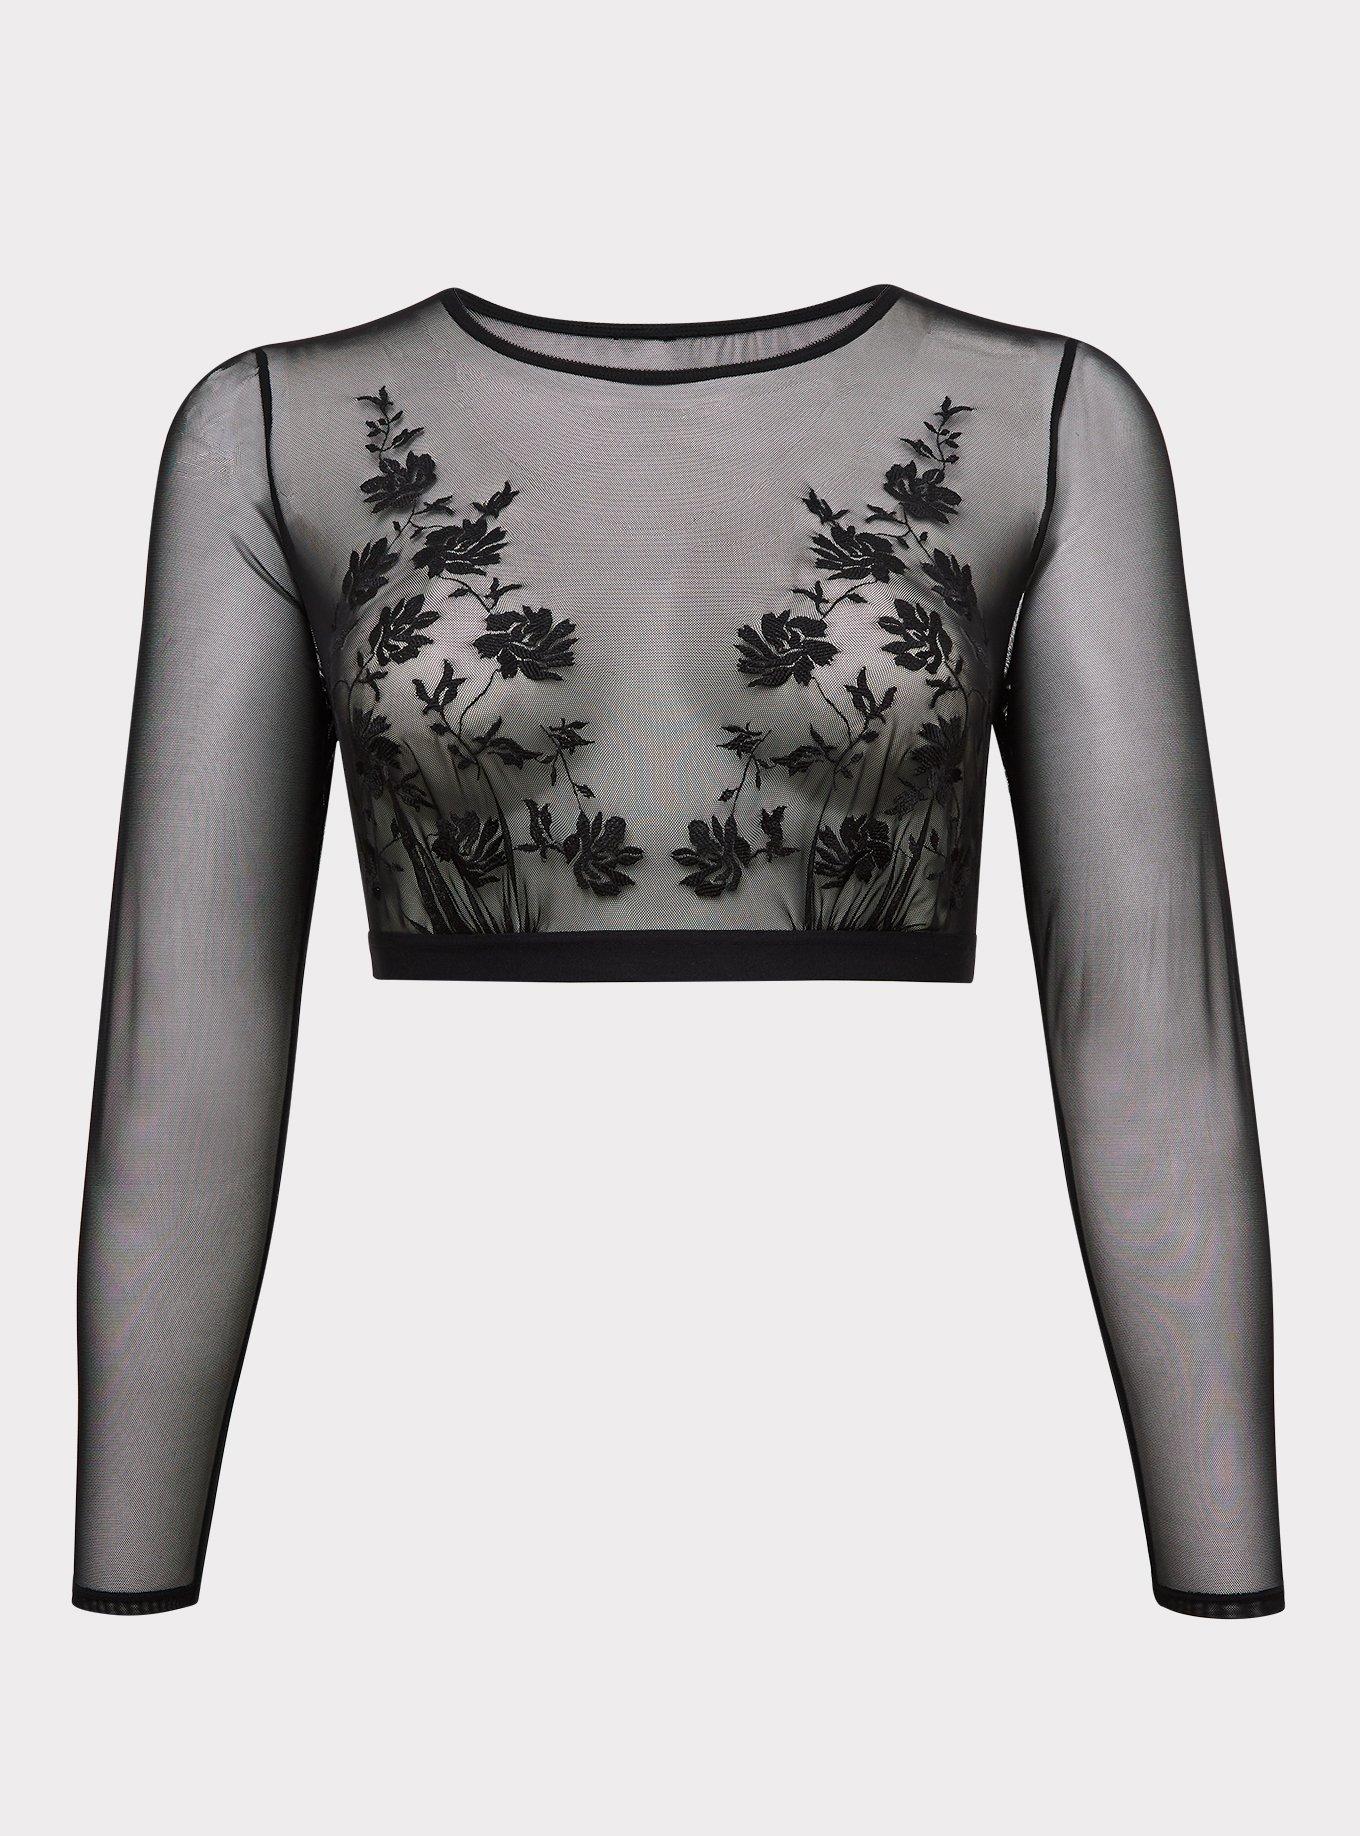 Plus Size - Black Mesh Embroidered Long Sleeve Under-It-All Crop Top ...